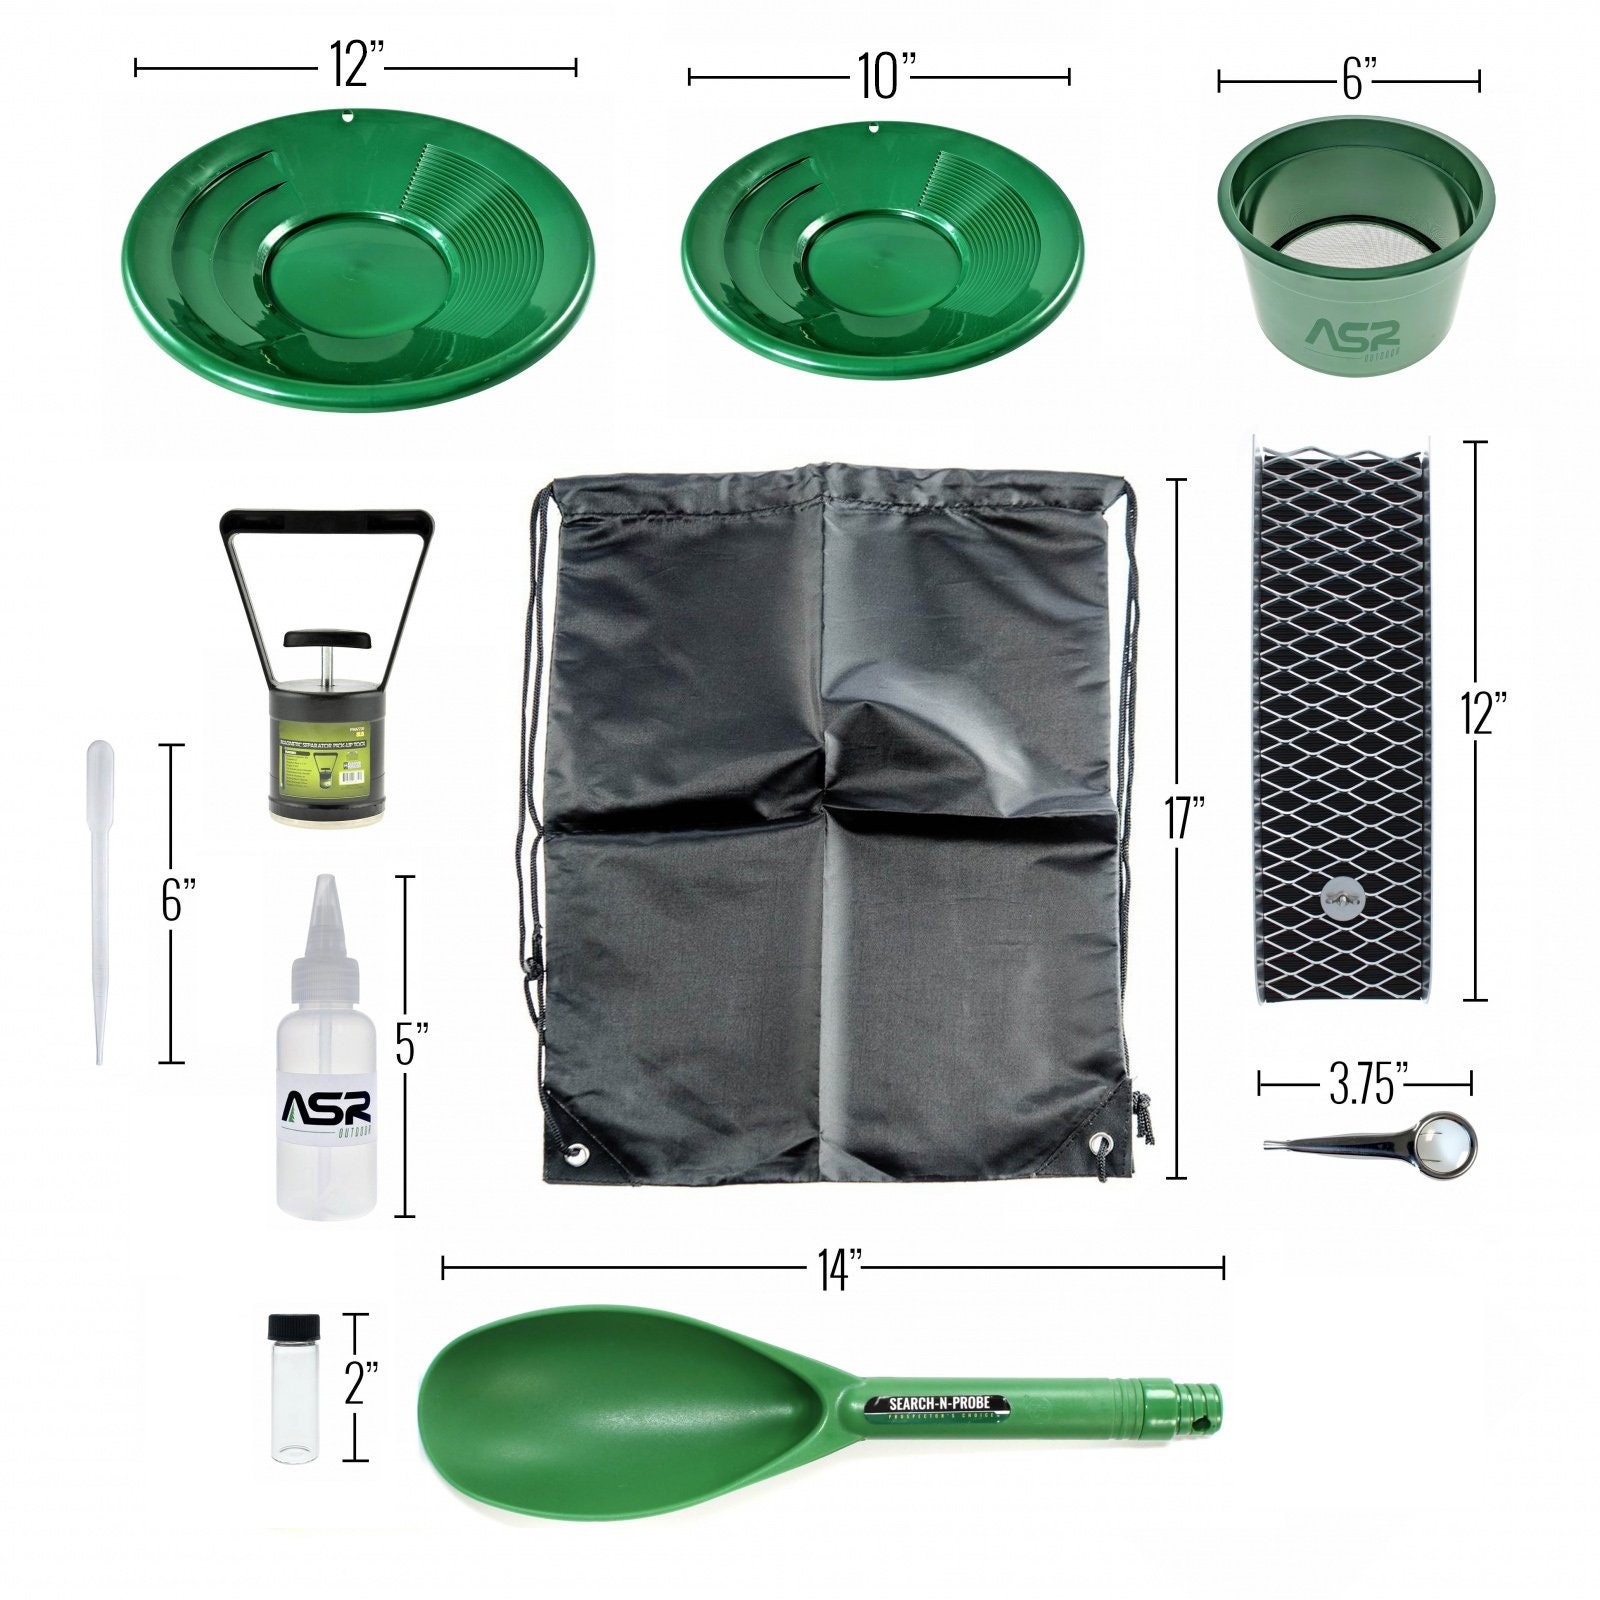 ASR Outdoor Complete Portable Travel Gold Panning Kit With hq nude image